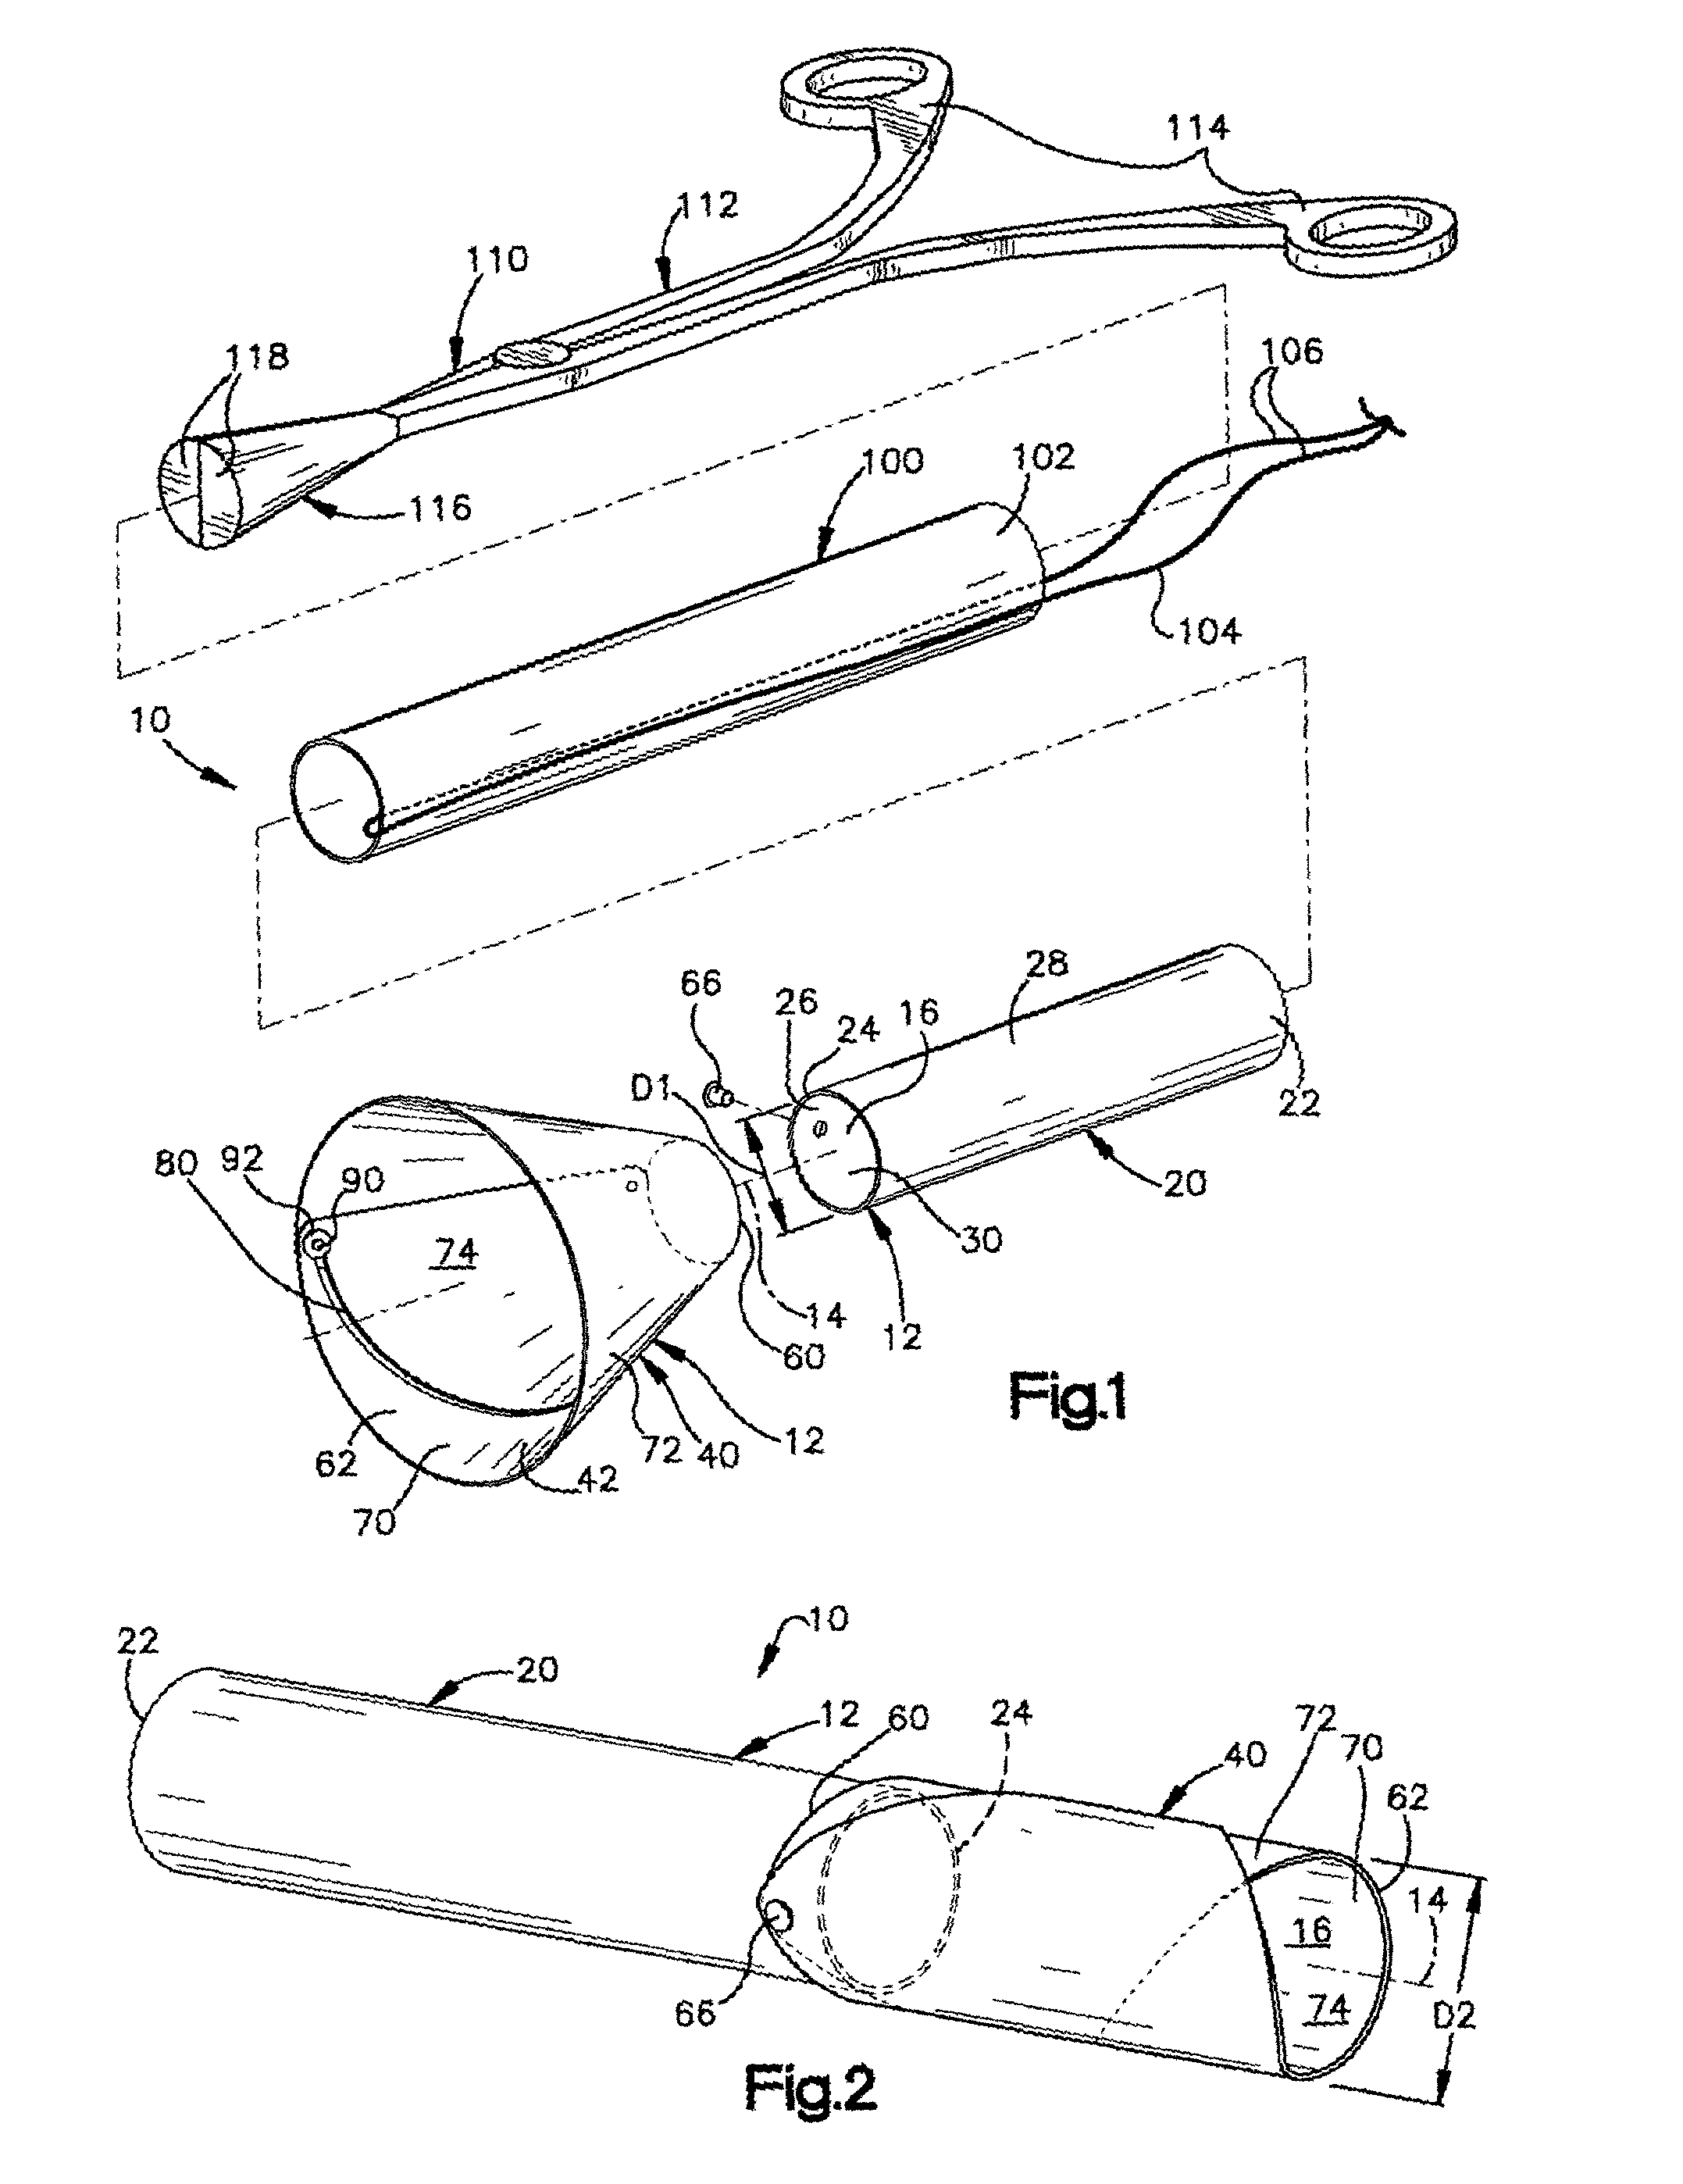 Surgical tool for use in expanding a cannula